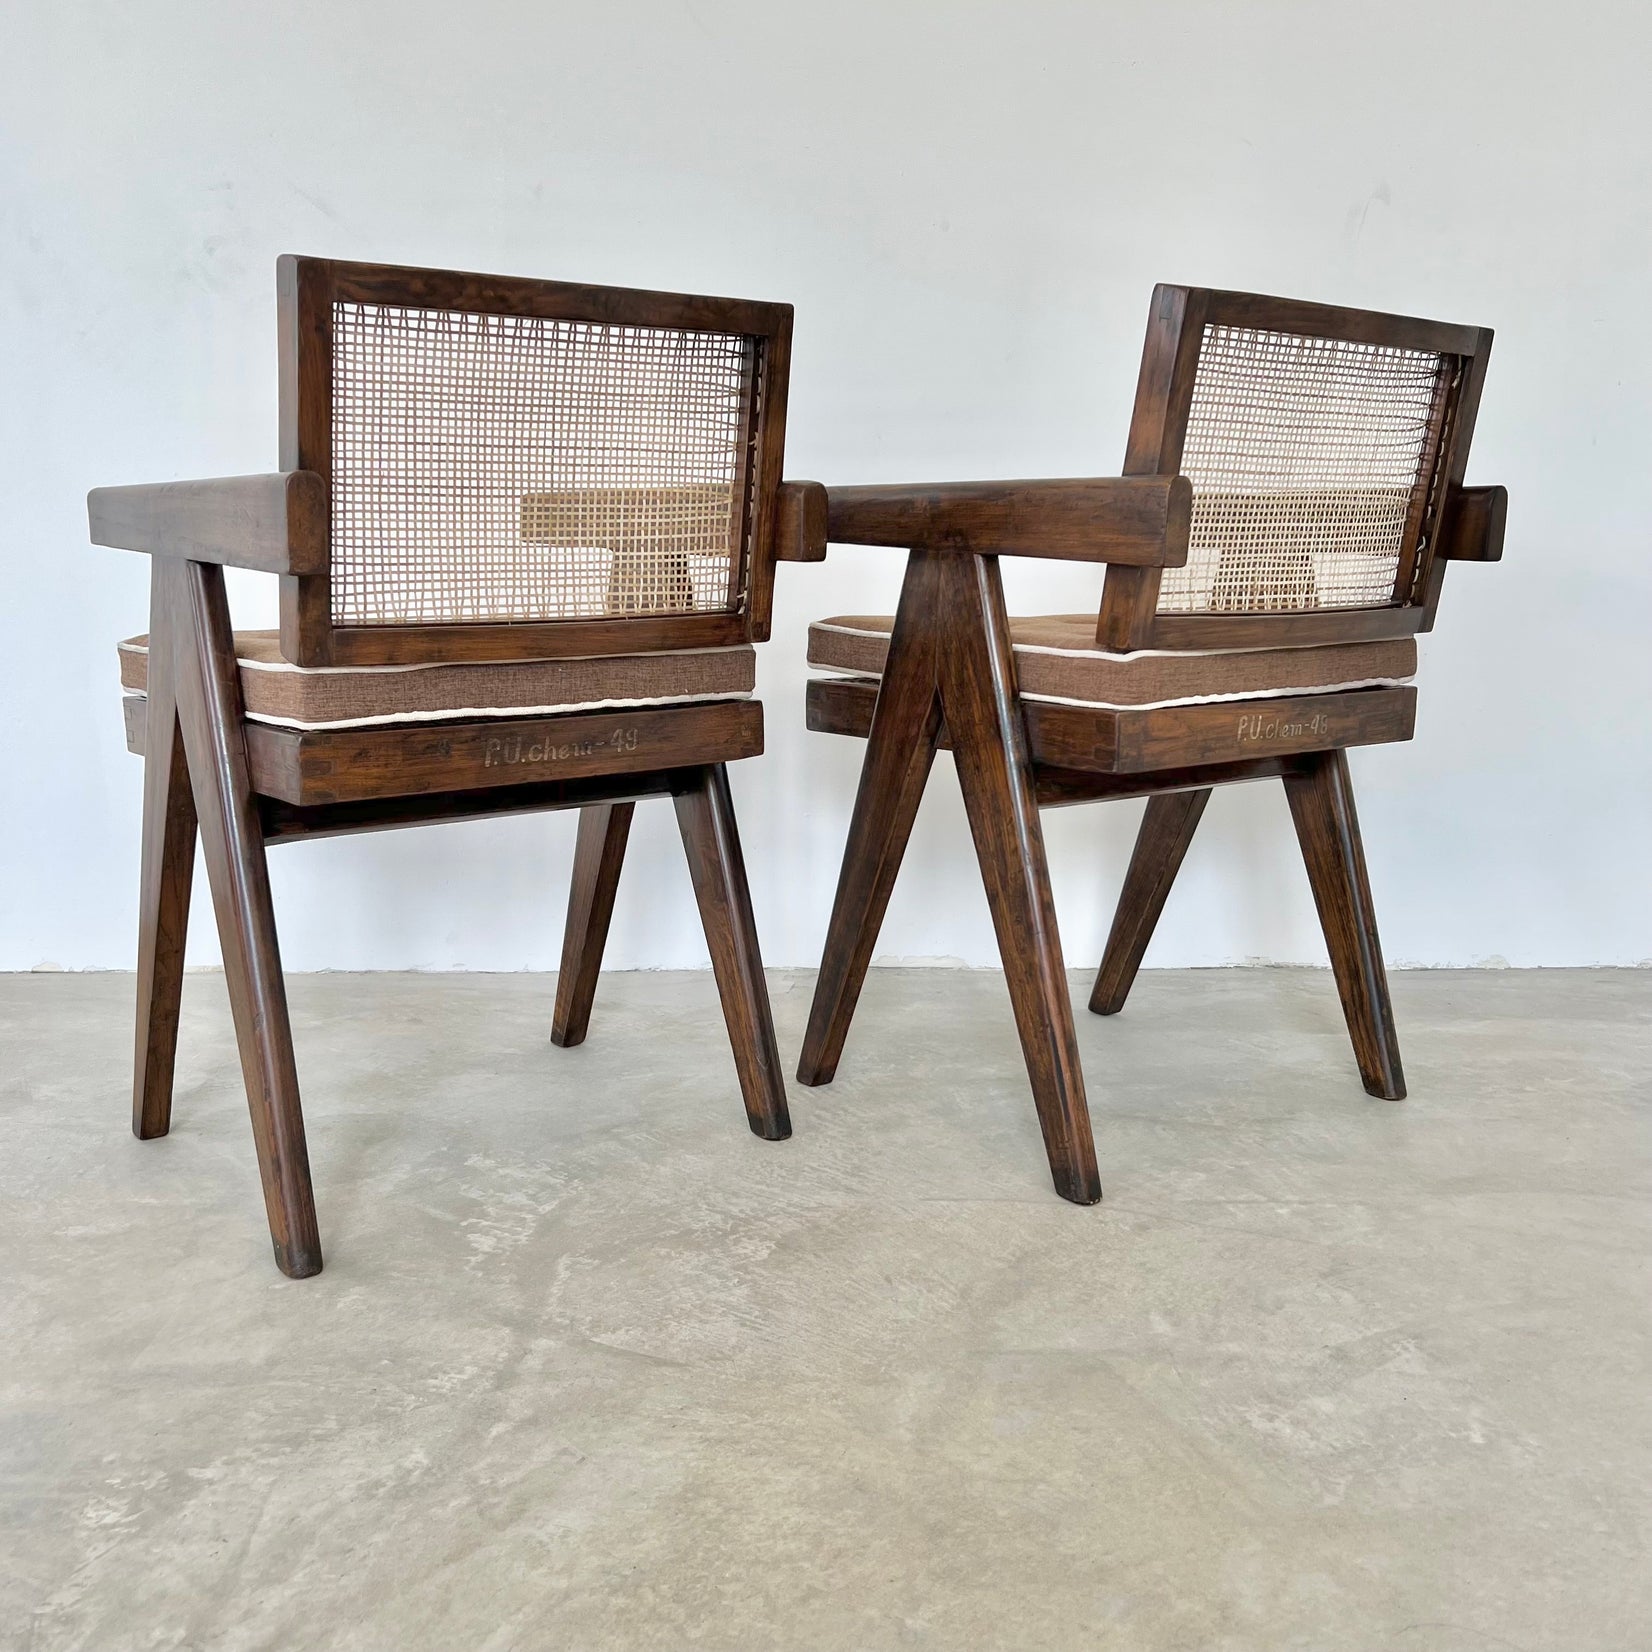 Pierre Jeanneret Office Chairs, 1950s Chandigargh